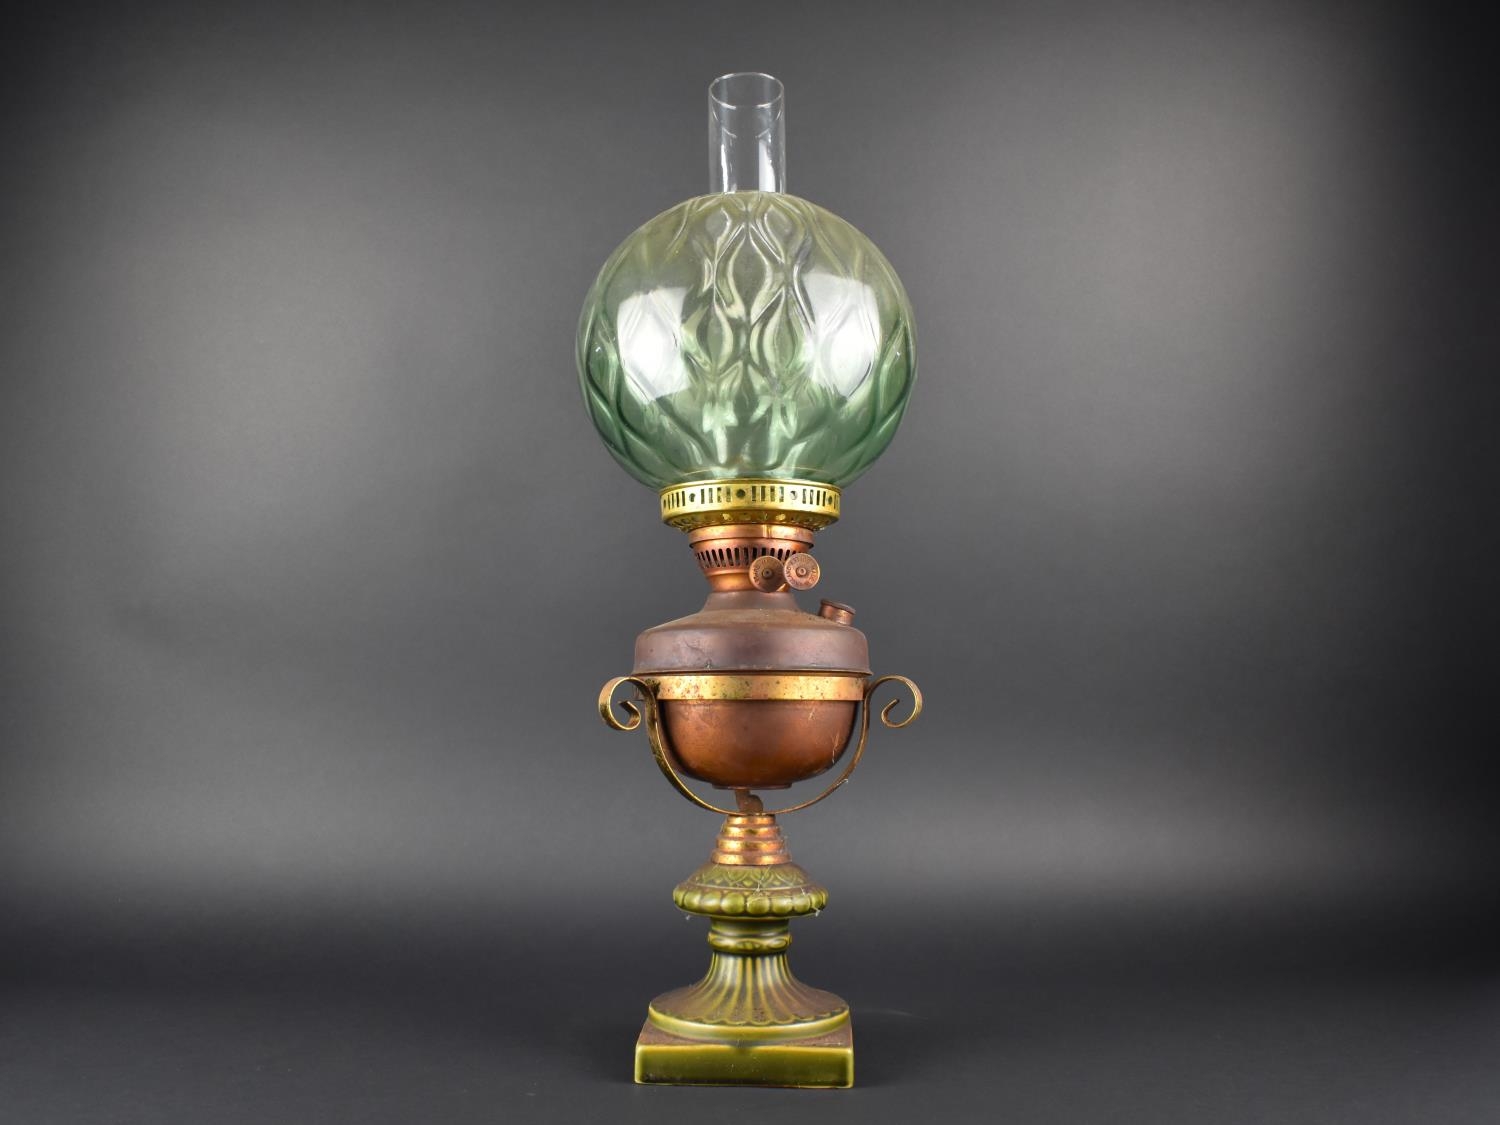 A Late Victorian/Edwardian Oil Lamp in Ceramic and Metal Holder, Green Glass Globe Shade and Plain